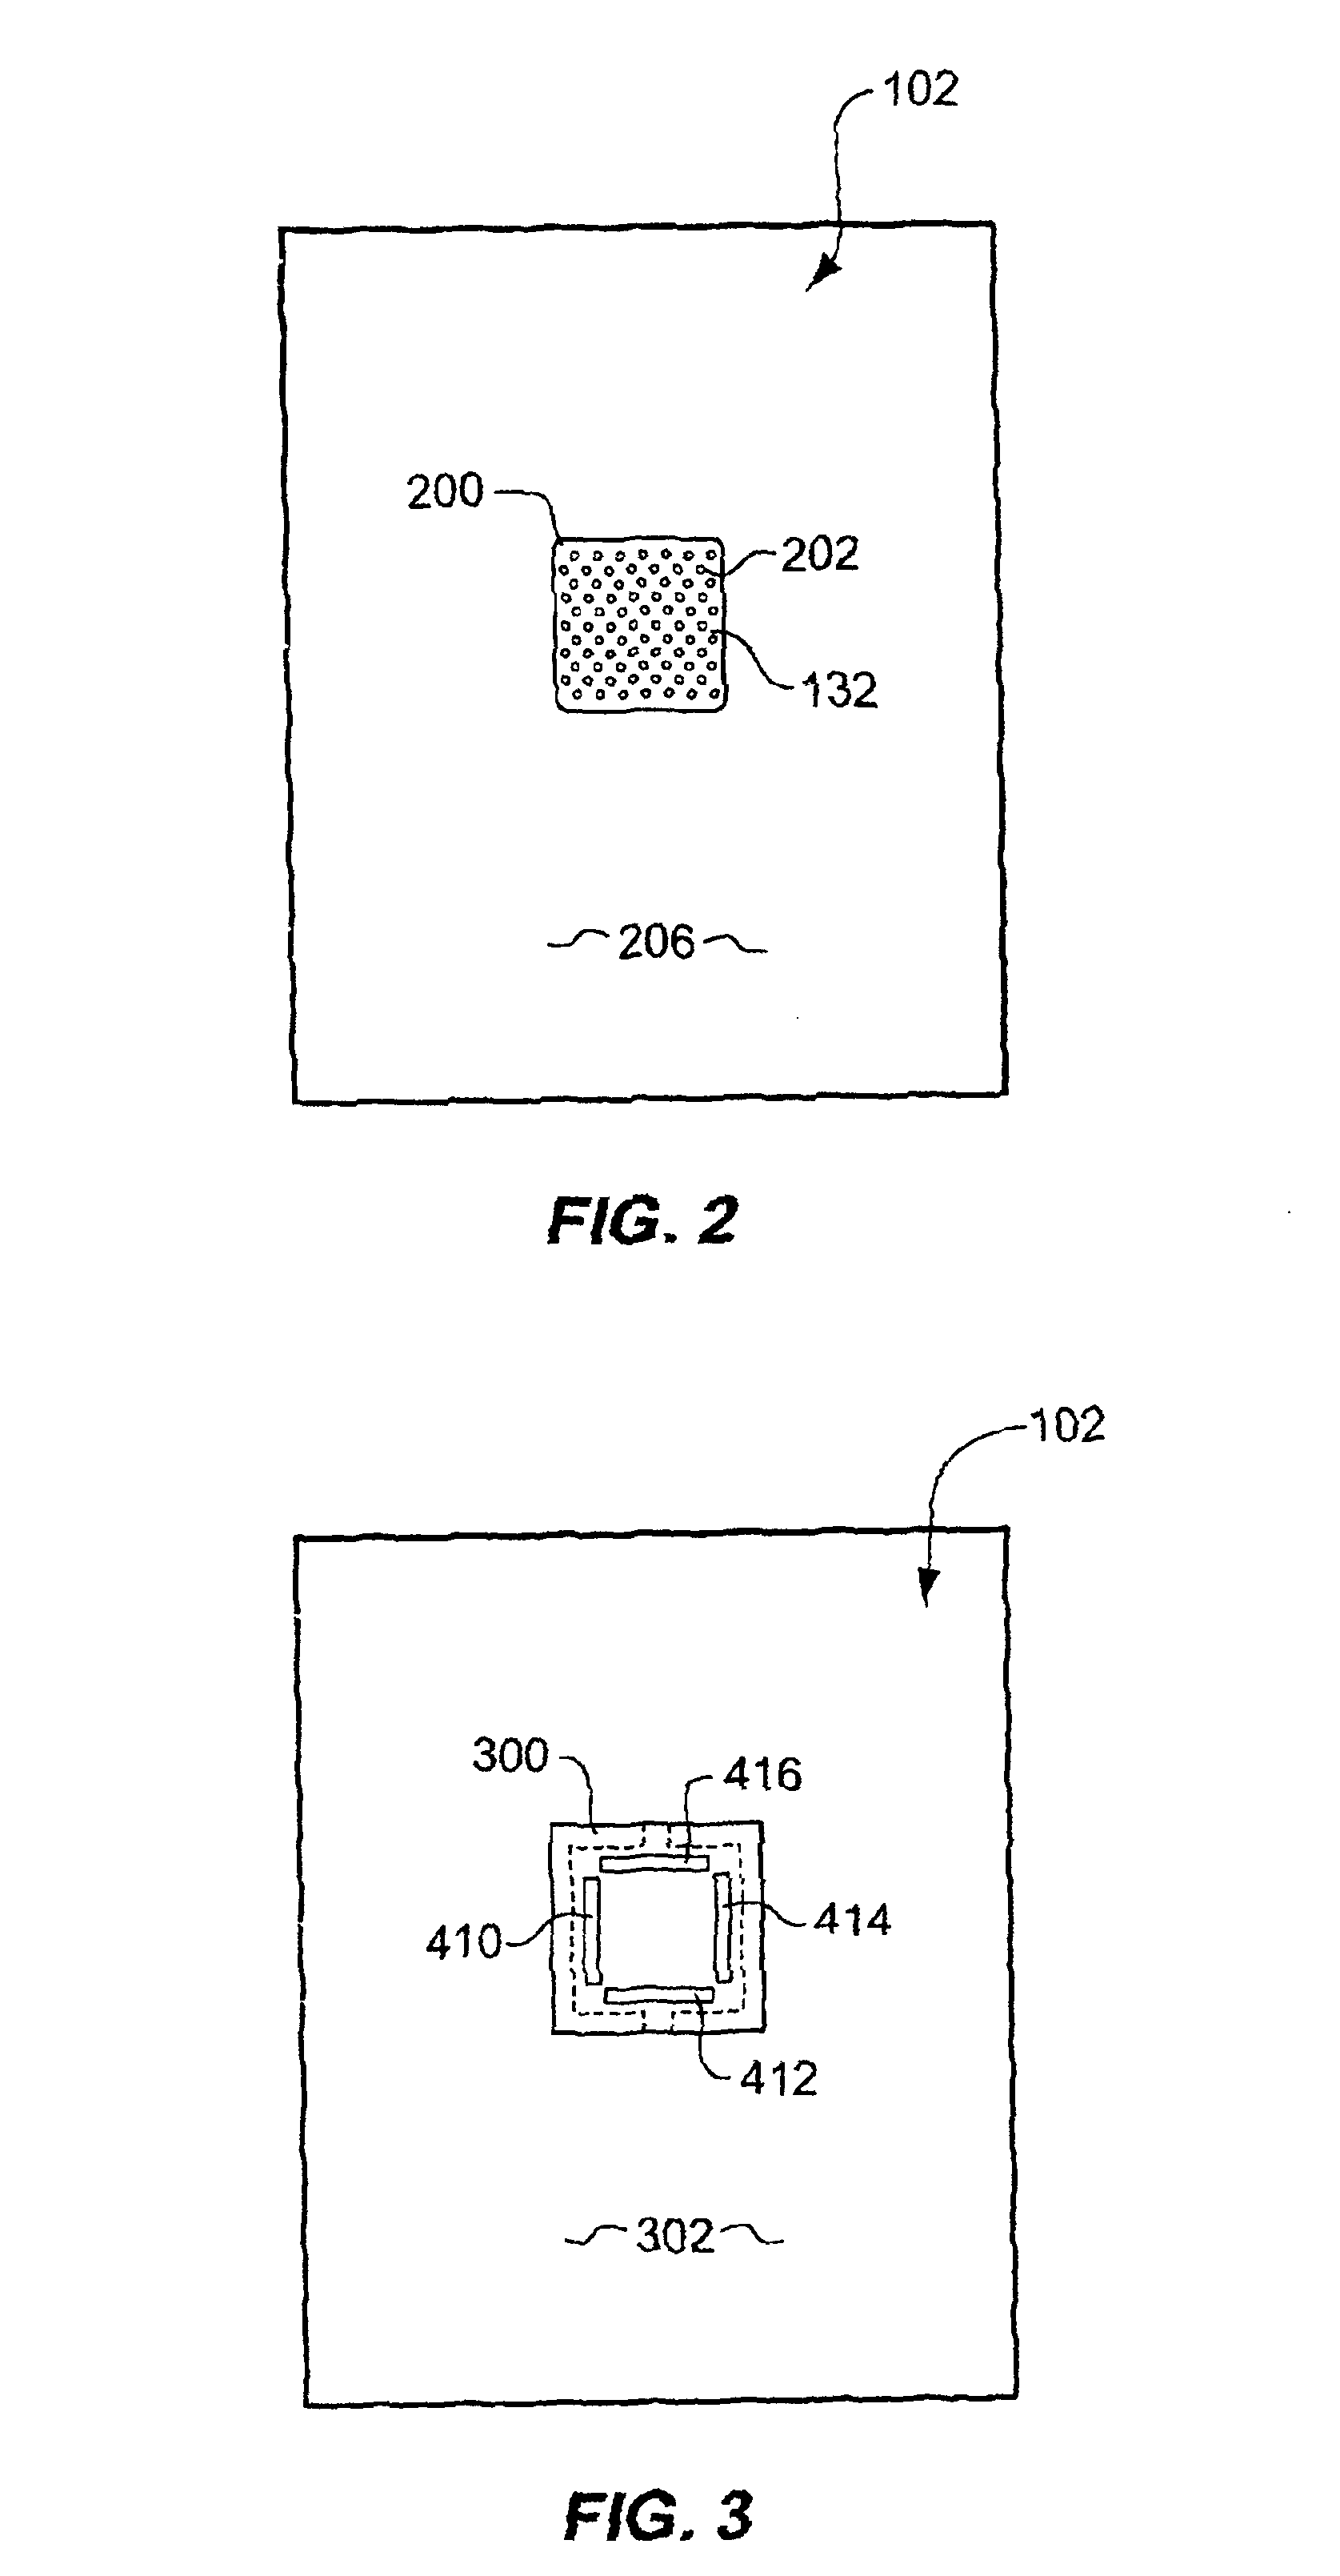 Method of attaching an integrated circuit to a chip mounting receptacle in a PCB with a bolster plate